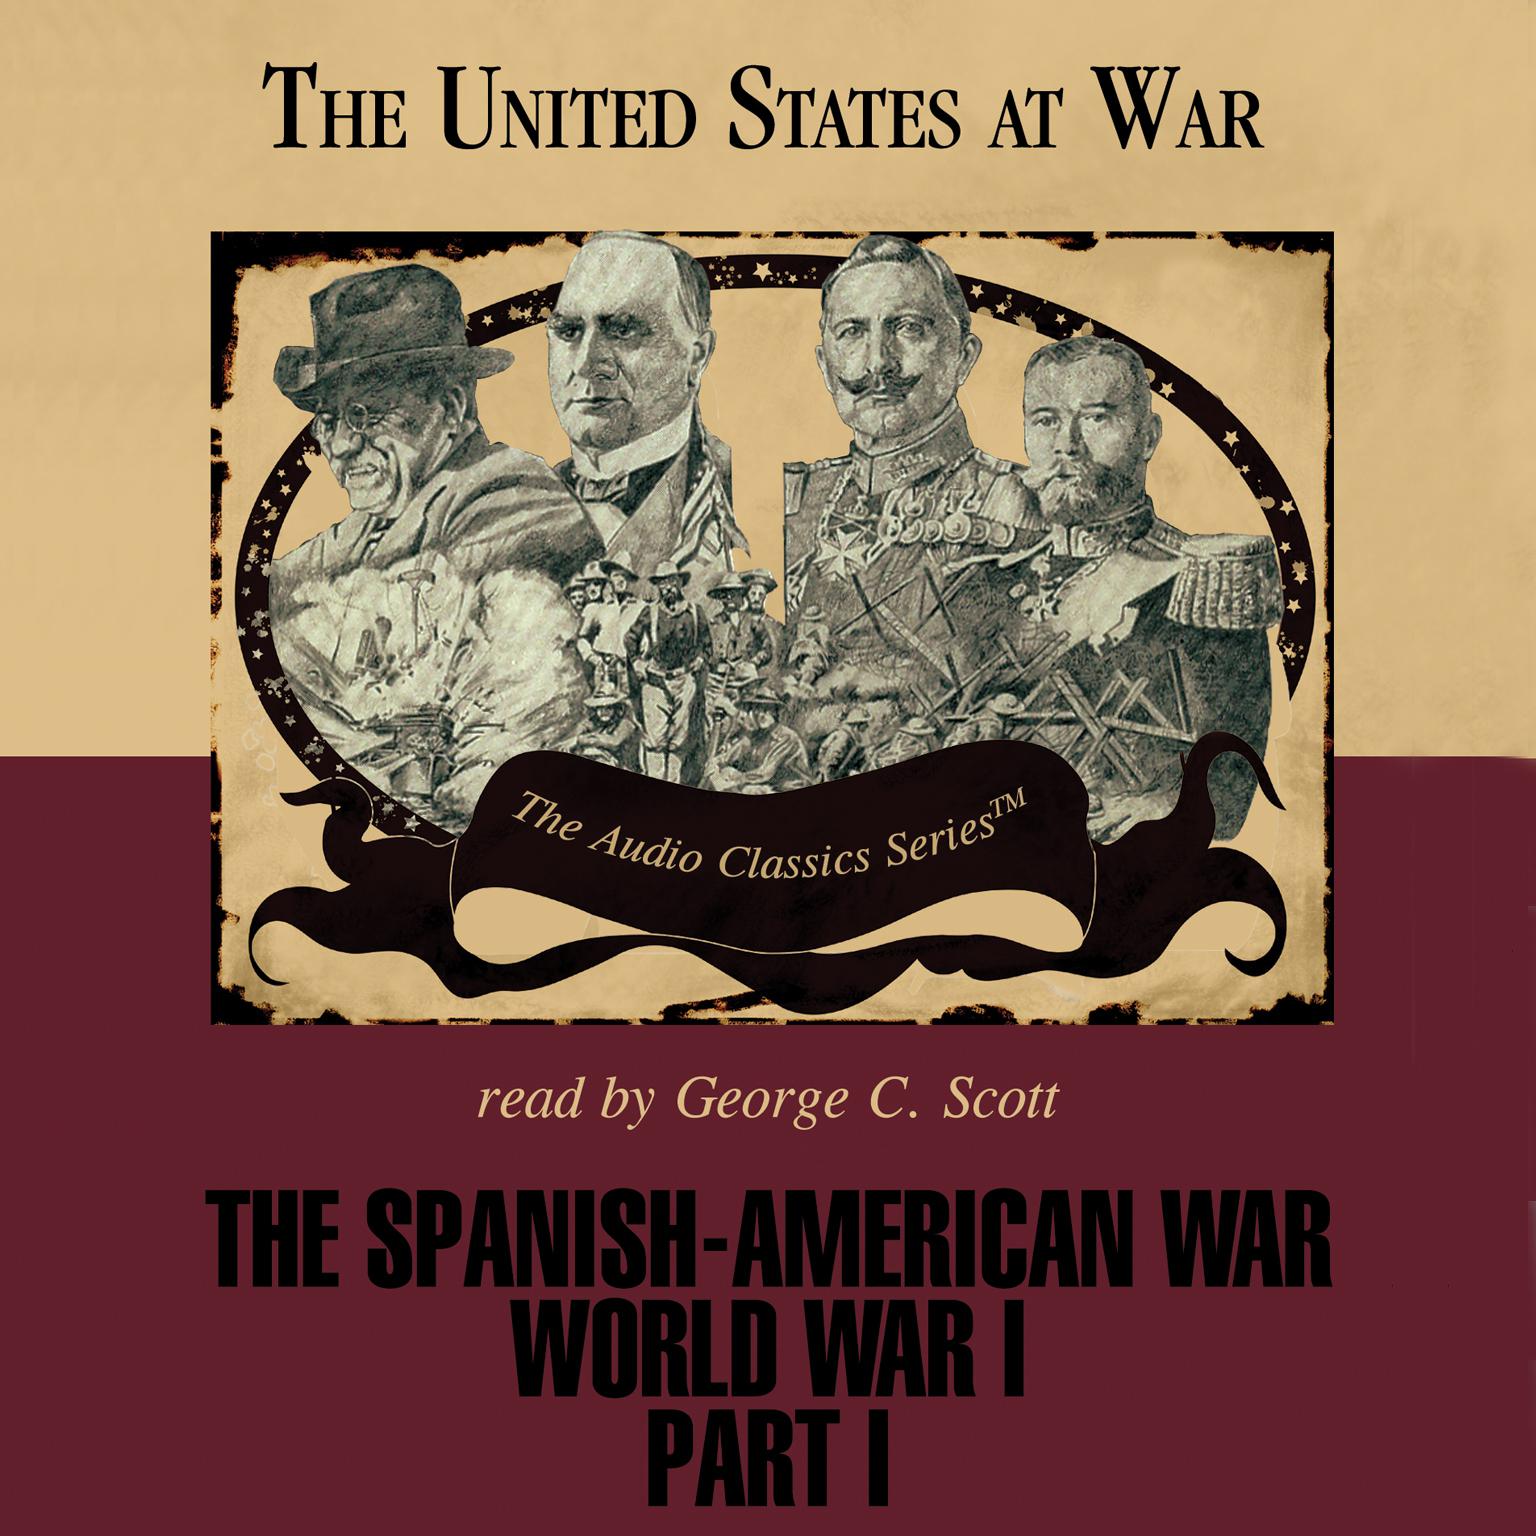 The Spanish-American War and World War I, Part 1 Audiobook, by Joseph Stromberg